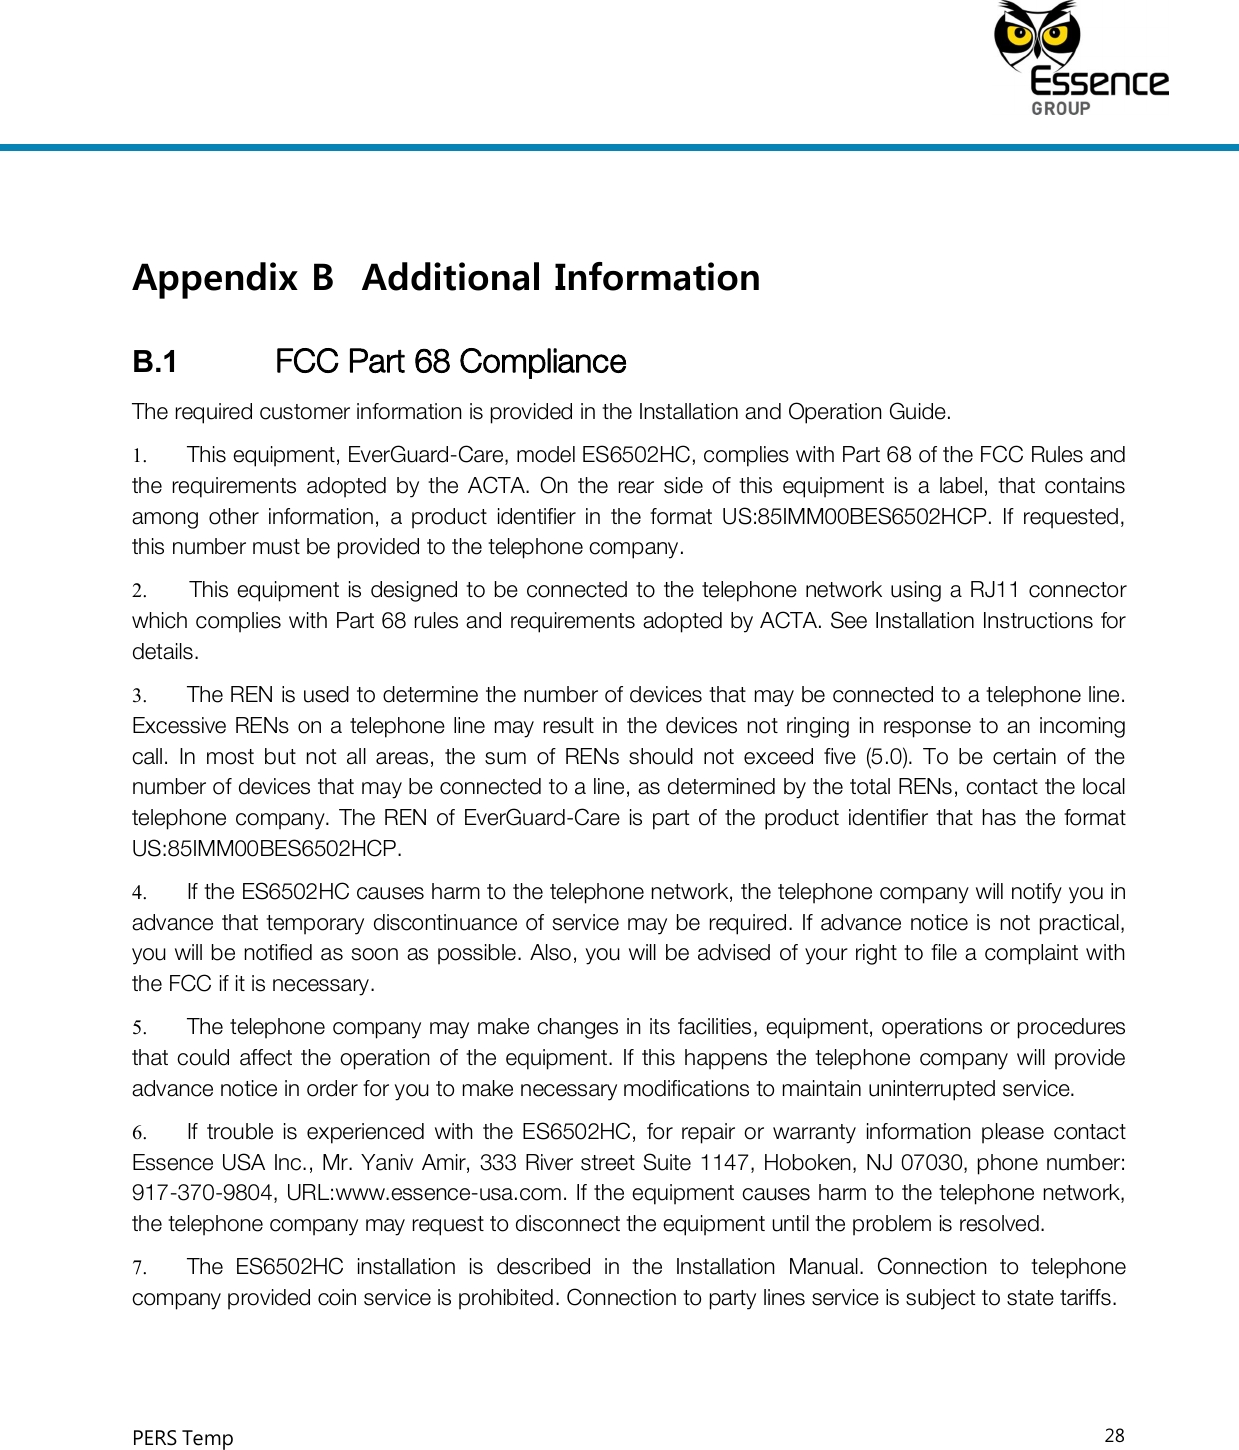     PERS Temp    28  Appendix B Additional Information B.1  FCC Part 68 Compliance The required customer information is provided in the Installation and Operation Guide. 1.  This equipment, EverGuard-Care, model ES6502HC, complies with Part 68 of the FCC Rules and the  requirements  adopted  by  the  ACTA.  On  the rear  side  of  this  equipment  is  a  label, that  contains among  other  information,  a  product  identifier  in  the  format  US:85IMM00BES6502HCP.  If  requested, this number must be provided to the telephone company.  2.  This equipment  is designed to be connected to the telephone network using a RJ11 connector which complies with Part 68 rules and requirements adopted by ACTA. See Installation Instructions for details. 3.  The REN is used to determine the number of devices that may be connected to a telephone line. Excessive RENs on a telephone line may result in  the devices not  ringing in response to an incoming call.  In  most  but  not  all  areas,  the  sum  of  RENs  should  not  exceed  five  (5.0).  To  be  certain  of  the number of devices that may be connected to a line, as determined by the total RENs, contact the local telephone  company. The REN of EverGuard-Care is part of  the product identifier that has the  format US:85IMM00BES6502HCP. 4.  If the ES6502HC causes harm to the telephone network, the telephone company will notify you in advance that temporary  discontinuance of service may be required. If advance notice is not practical, you will be notified as soon as possible. Also, you will be advised of your right to file a complaint with the FCC if it is necessary. 5.  The telephone company may make changes in its facilities, equipment, operations or procedures that could  affect the  operation  of the equipment.  If  this happens the telephone  company will provide advance notice in order for you to make necessary modifications to maintain uninterrupted service. 6.  If  trouble  is experienced  with  the  ES6502HC,  for  repair  or  warranty  information  please  contact Essence USA Inc., Mr. Yaniv Amir, 333 River street Suite 1147, Hoboken, NJ 07030, phone number: 917-370-9804, URL:www.essence-usa.com. If the equipment causes harm to the telephone network, the telephone company may request to disconnect the equipment until the problem is resolved. 7.  The  ES6502HC  installation  is  described  in  the  Installation  Manual.  Connection  to  telephone company provided coin service is prohibited. Connection to party lines service is subject to state tariffs.    